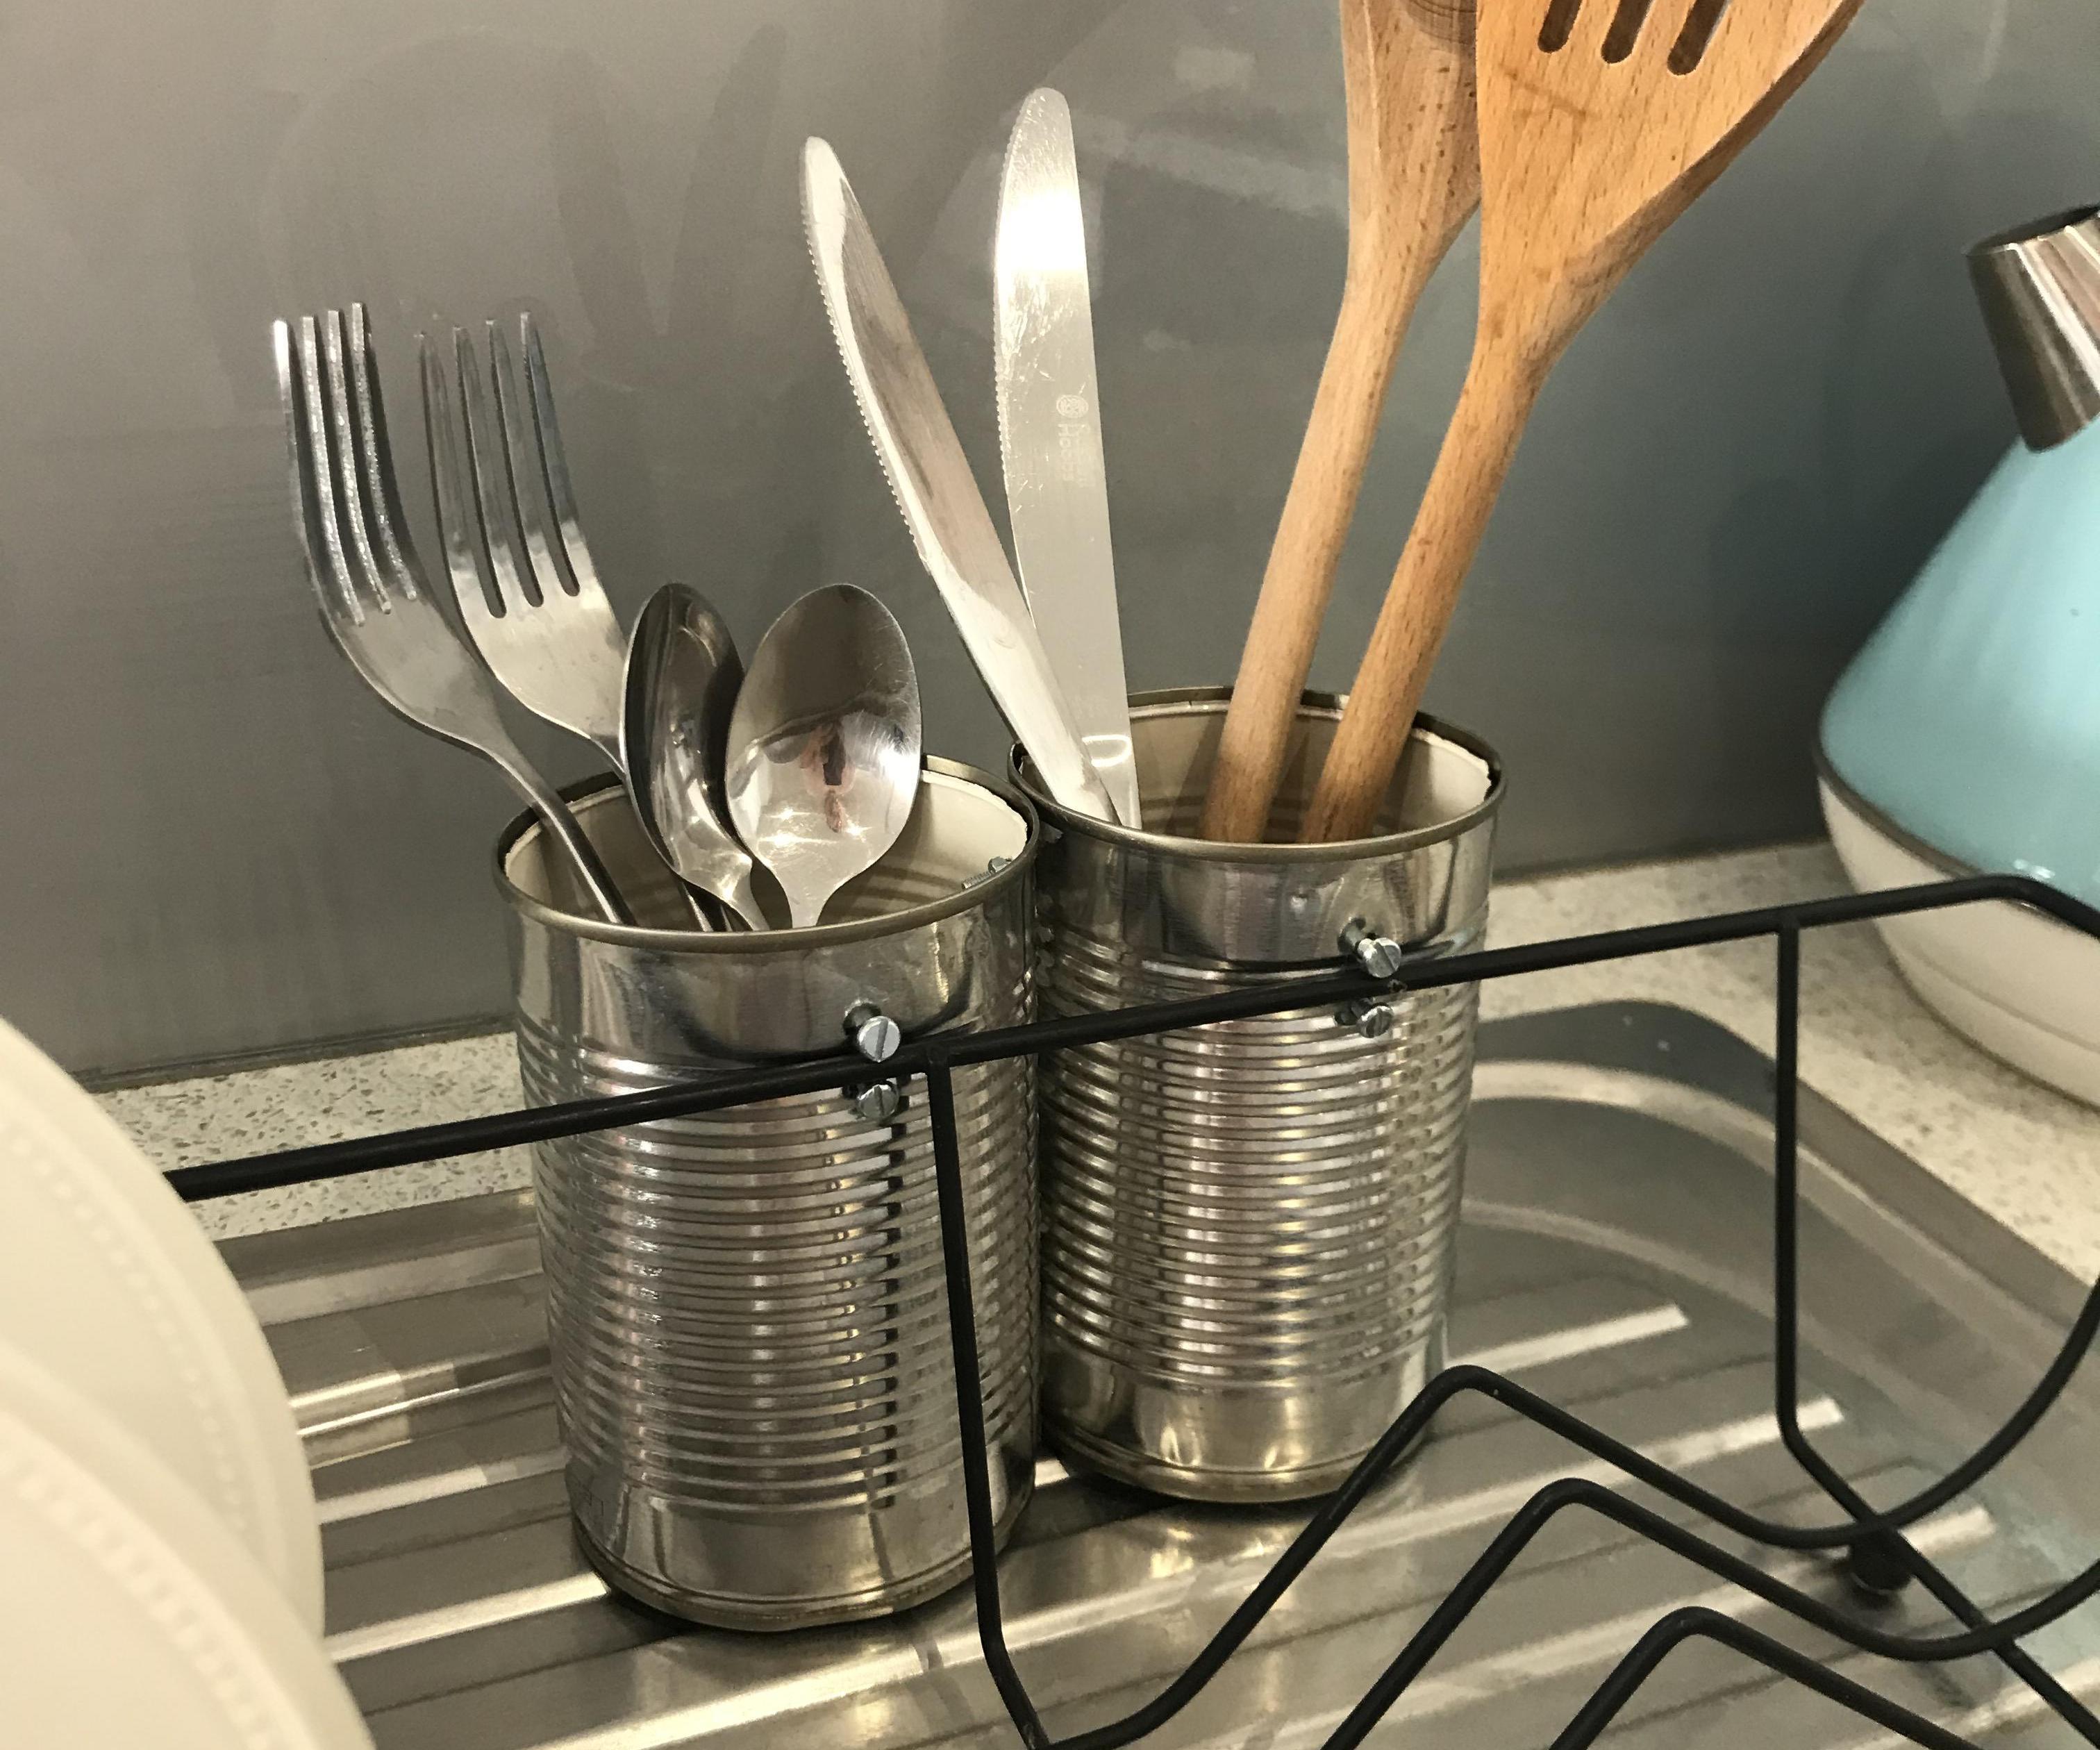 How To Make A Cutlery Dryer